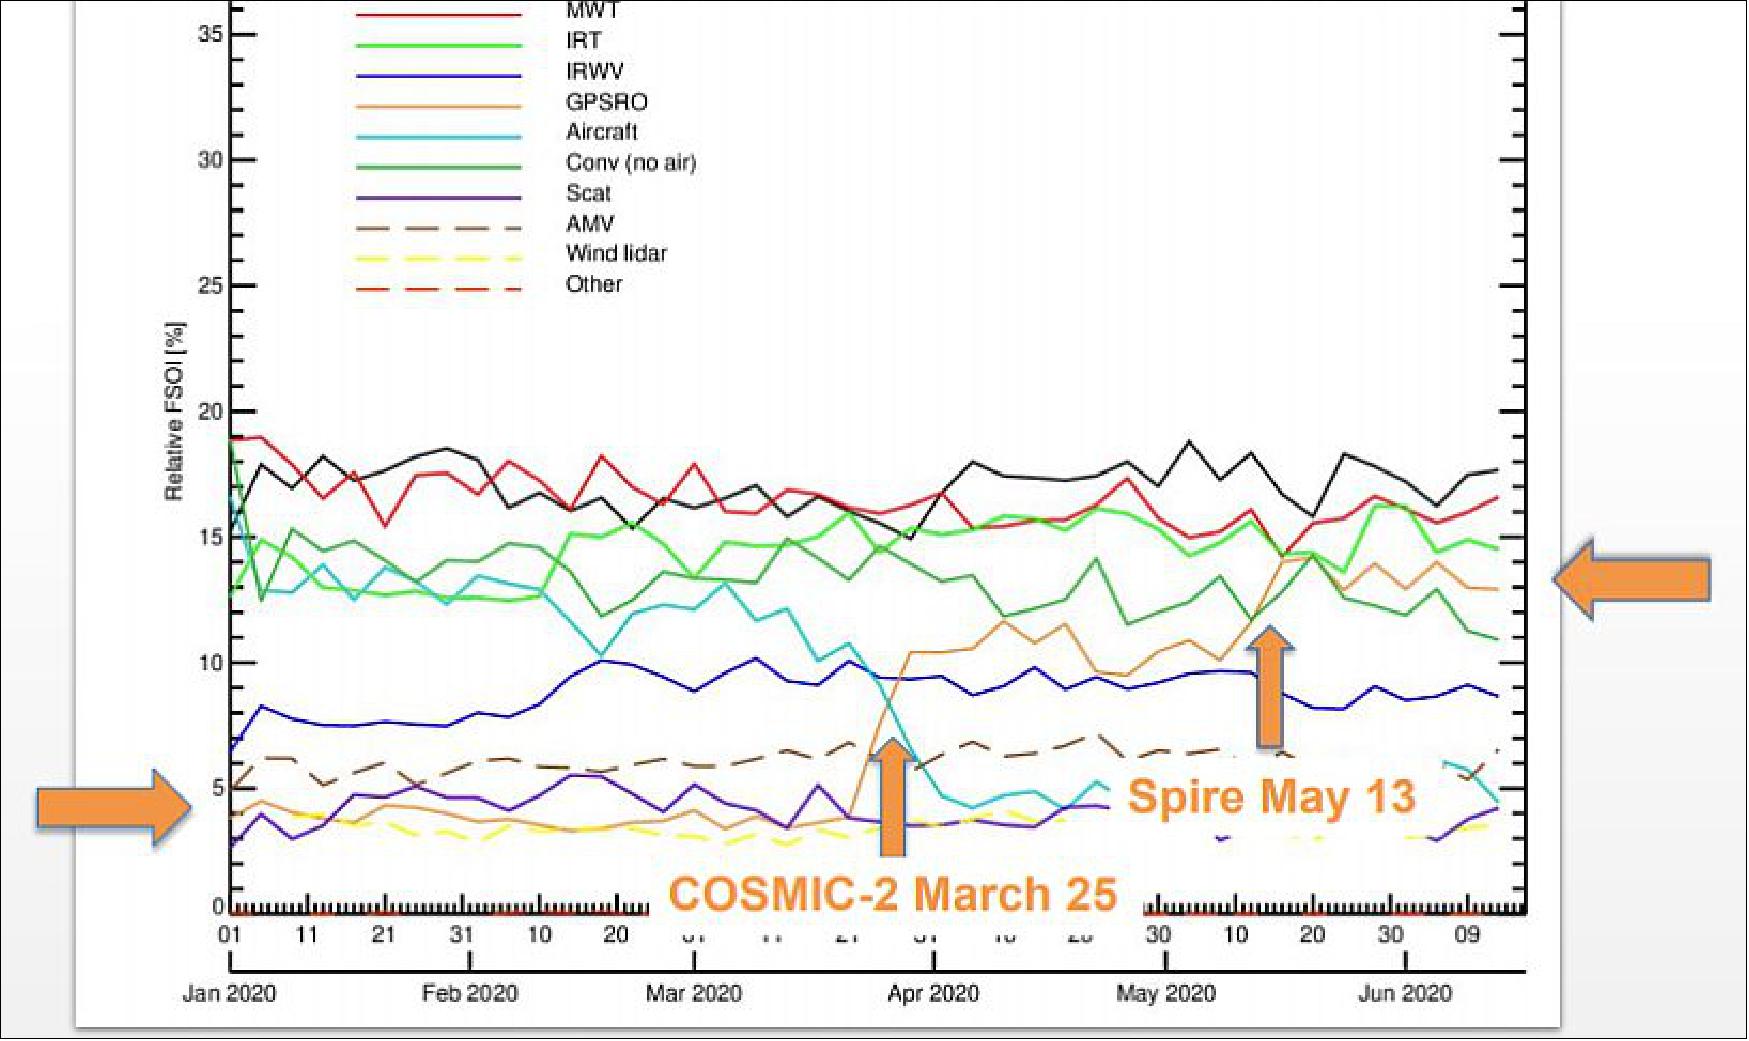 Figure 13: The ECMWF (European Centre for Medium-Range Weather Forecasts) created this Forecast Sensitivity Observation Impact chart, which notes the relative importance of various datasets in reducing forecast errors. The light blue line shows the declining impact of airborne sensors as air travel declined during the COVID-19 pandemic. The orange line shows the growing importance of radio occultation data with the addition of data from the second Constellation Observing System for Meteorology, Ionosphere and Climate in March and Spire Global data in May (image credit: ECMWF)